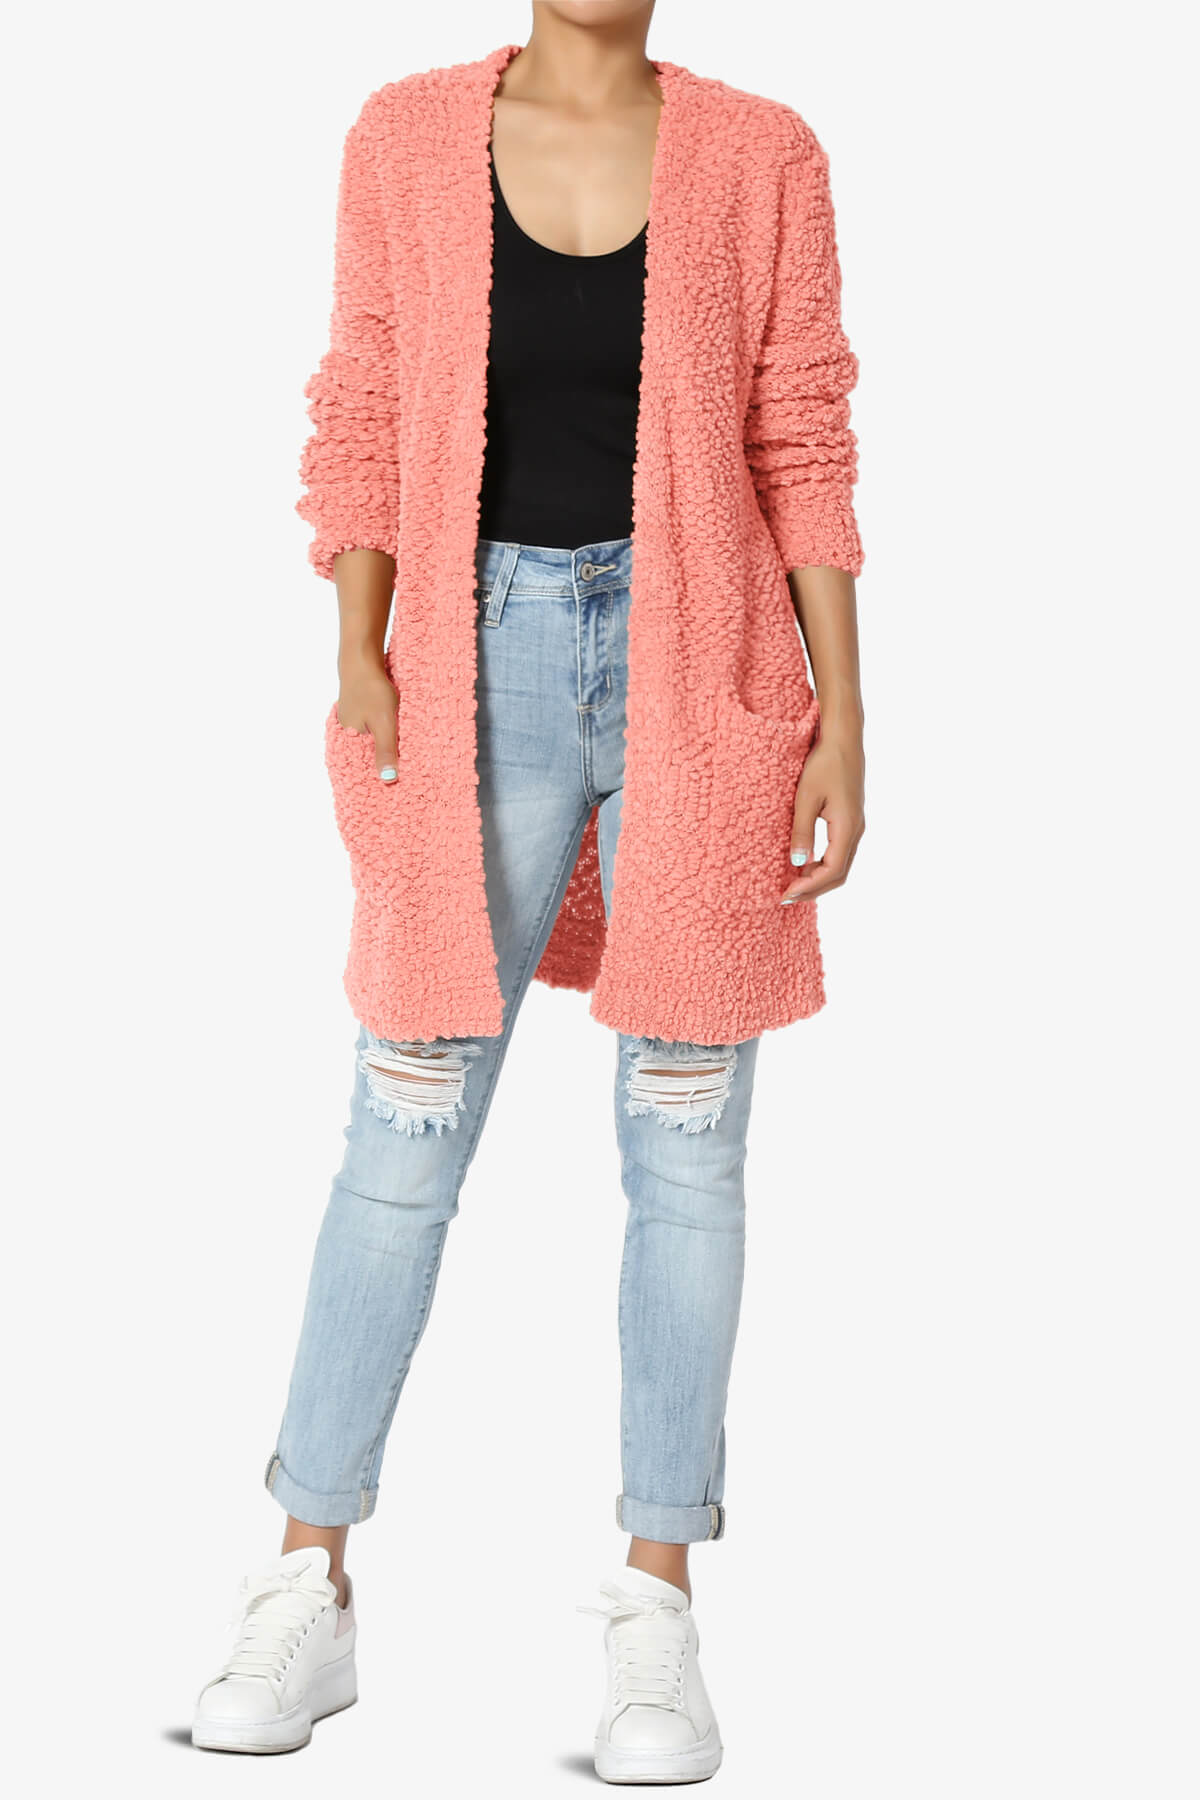 Barry Soft Popcorn Knit Sweater Cardigan CORAL_6